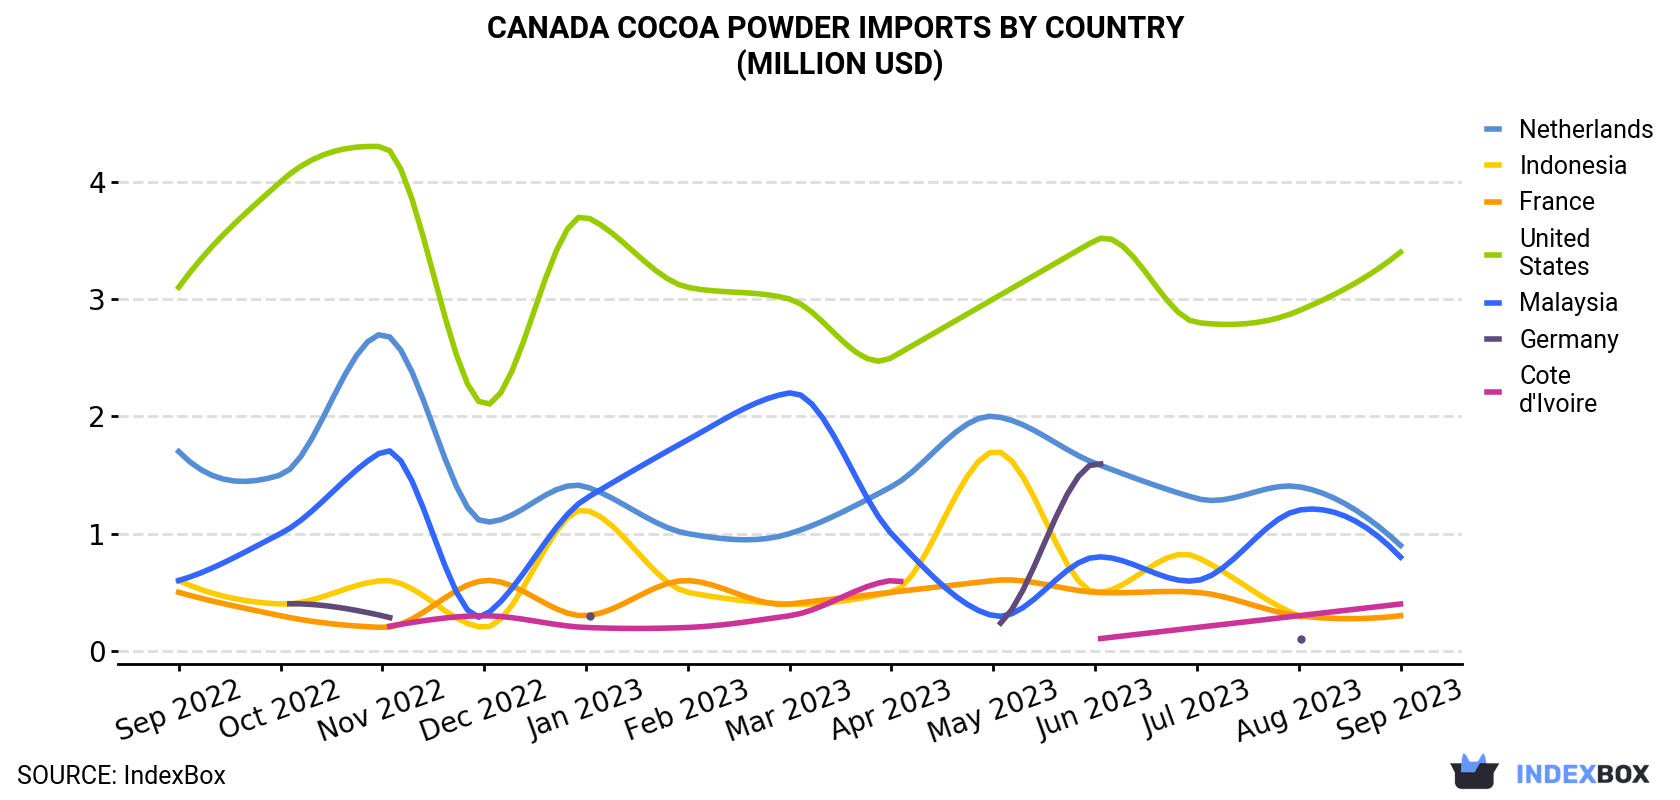 Canada Cocoa Powder Imports By Country (Million USD)